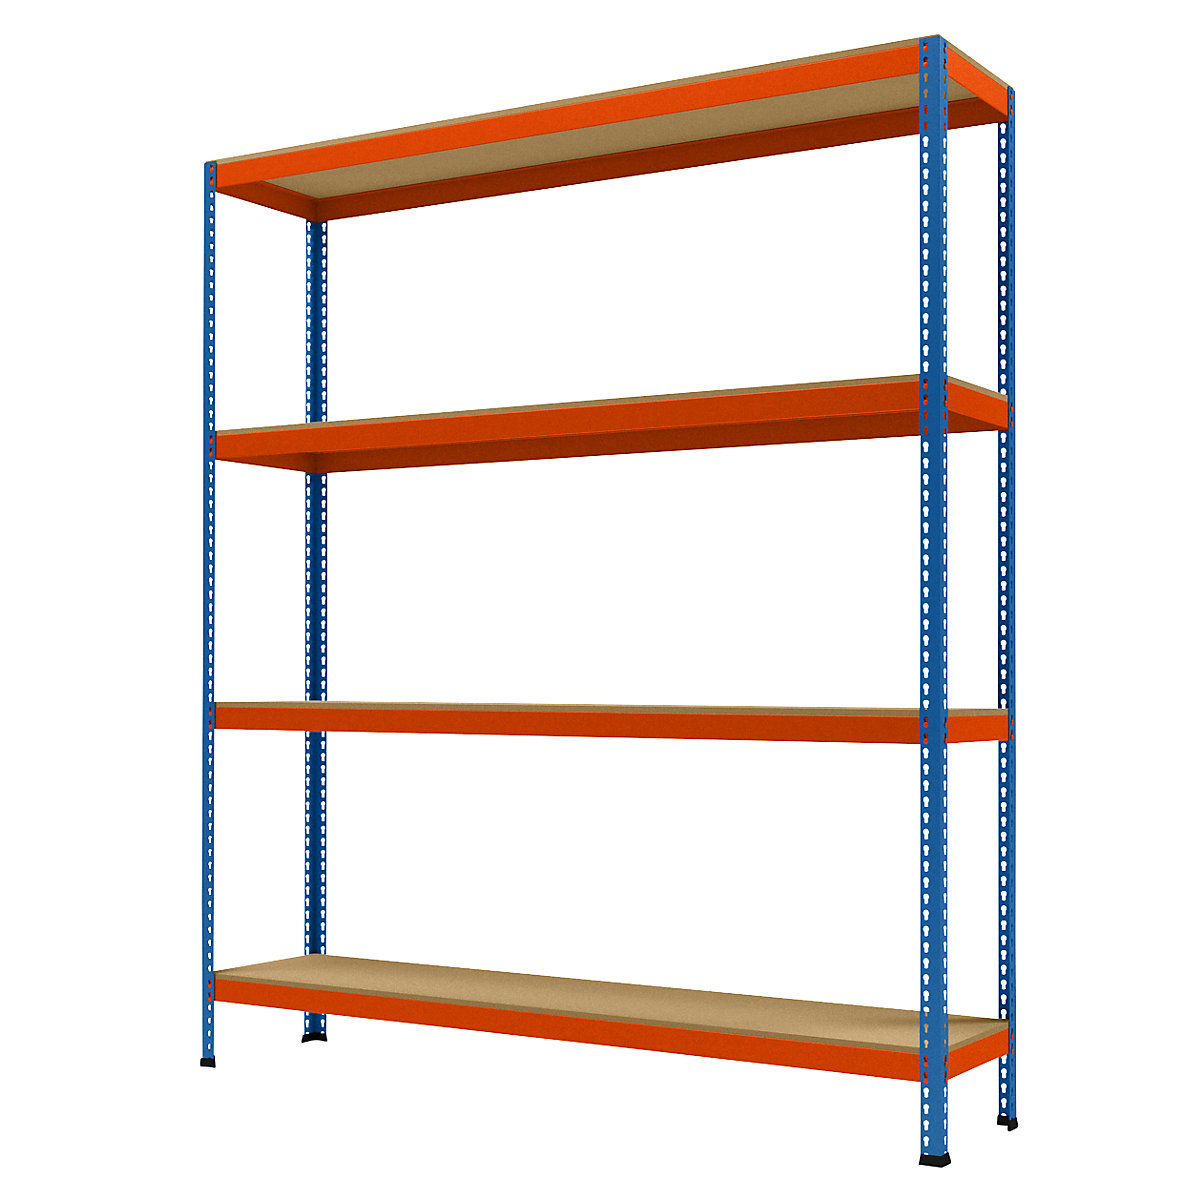 Wide span heavy duty shelving, height 2438 mm, overall depth 468 mm, width 2146 mm